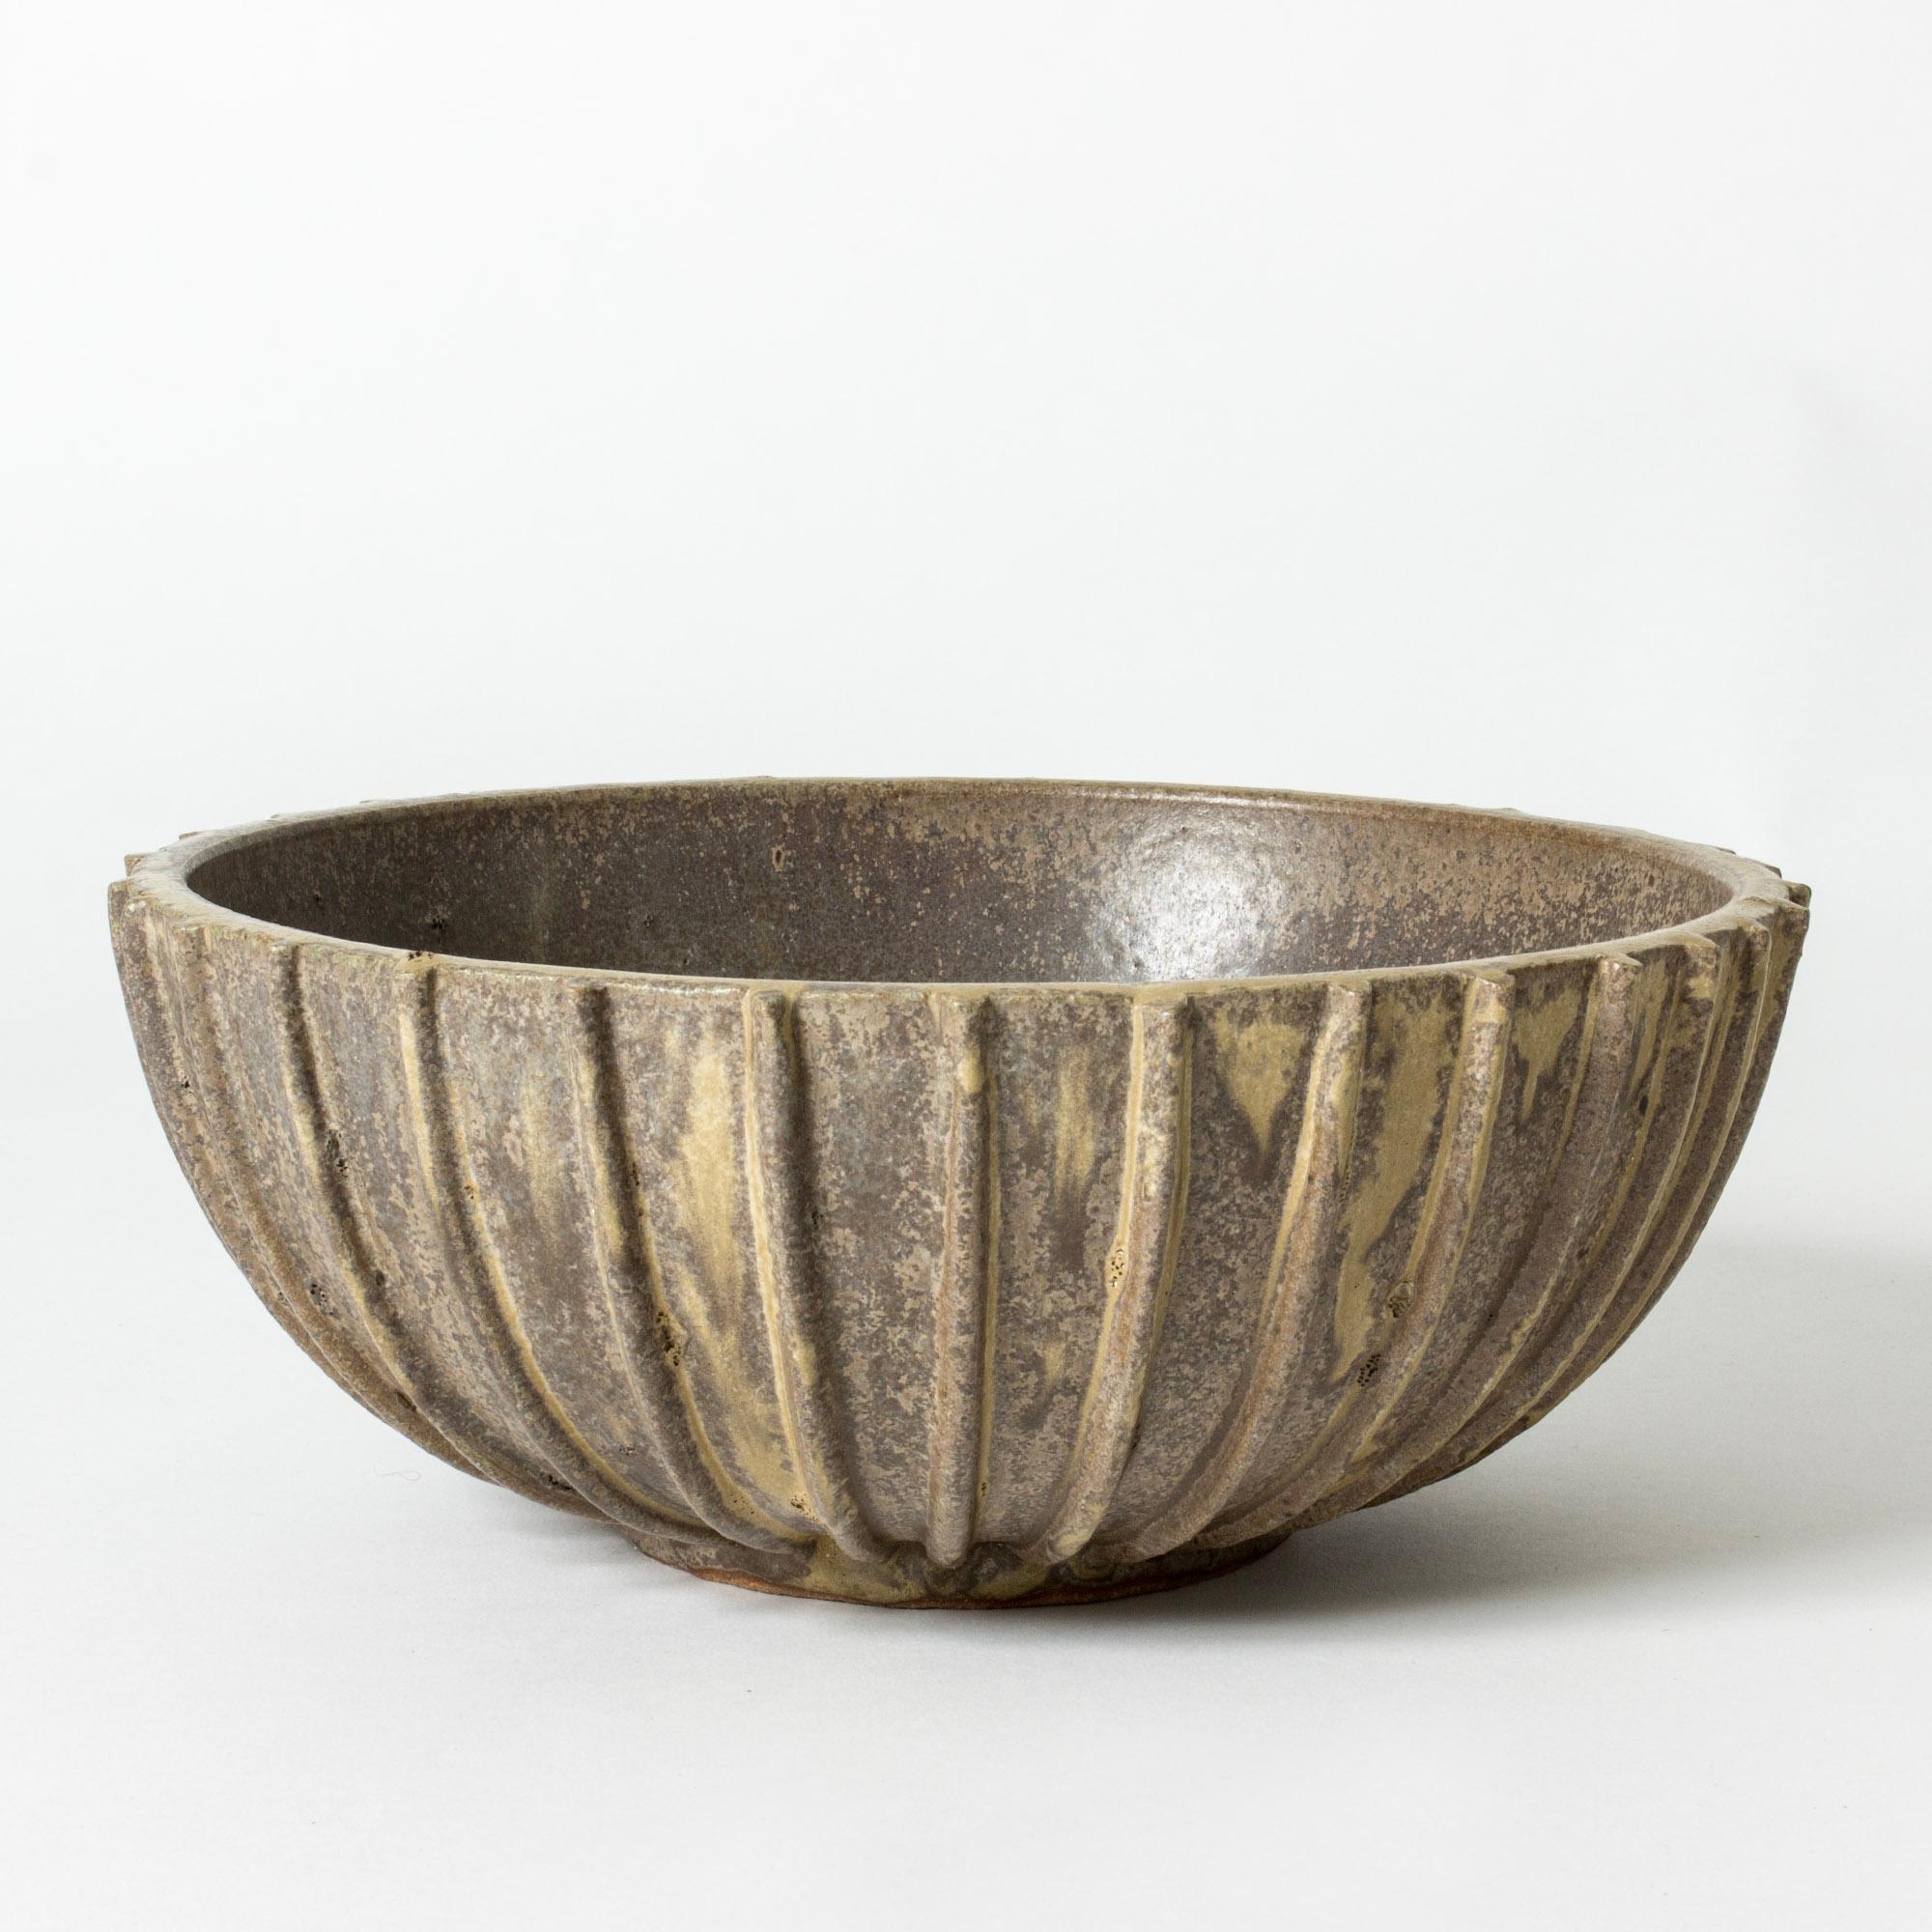 Striking modernist stoneware bowl by Arne Bang, in thick quality with a pattern of stripes. Earthy glaze with a rustic feel.